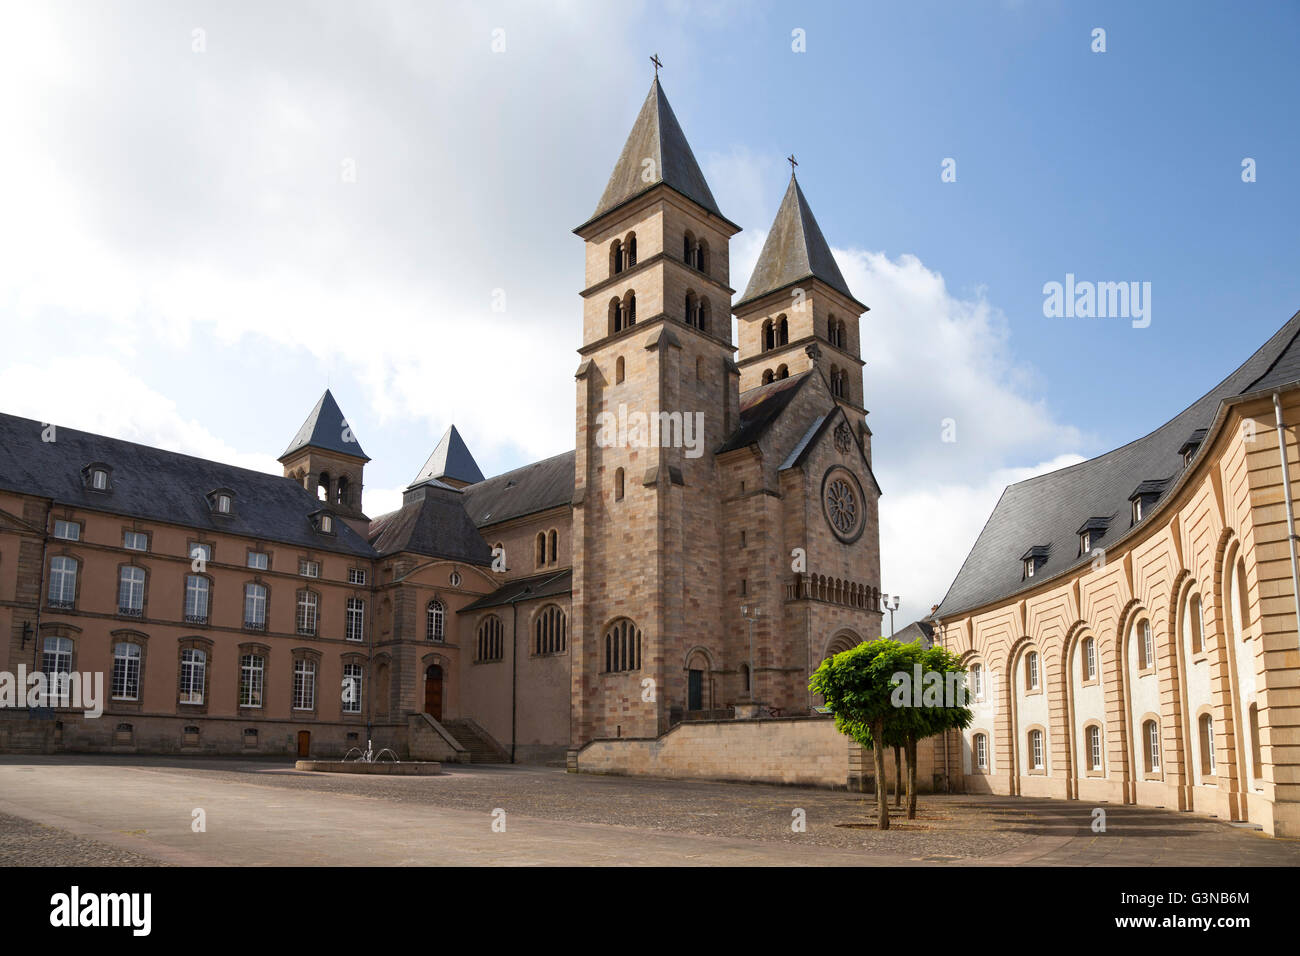 Basilica and former Abbey of St. Willibrord, Echternach, Luxembourg, Europe Stock Photo